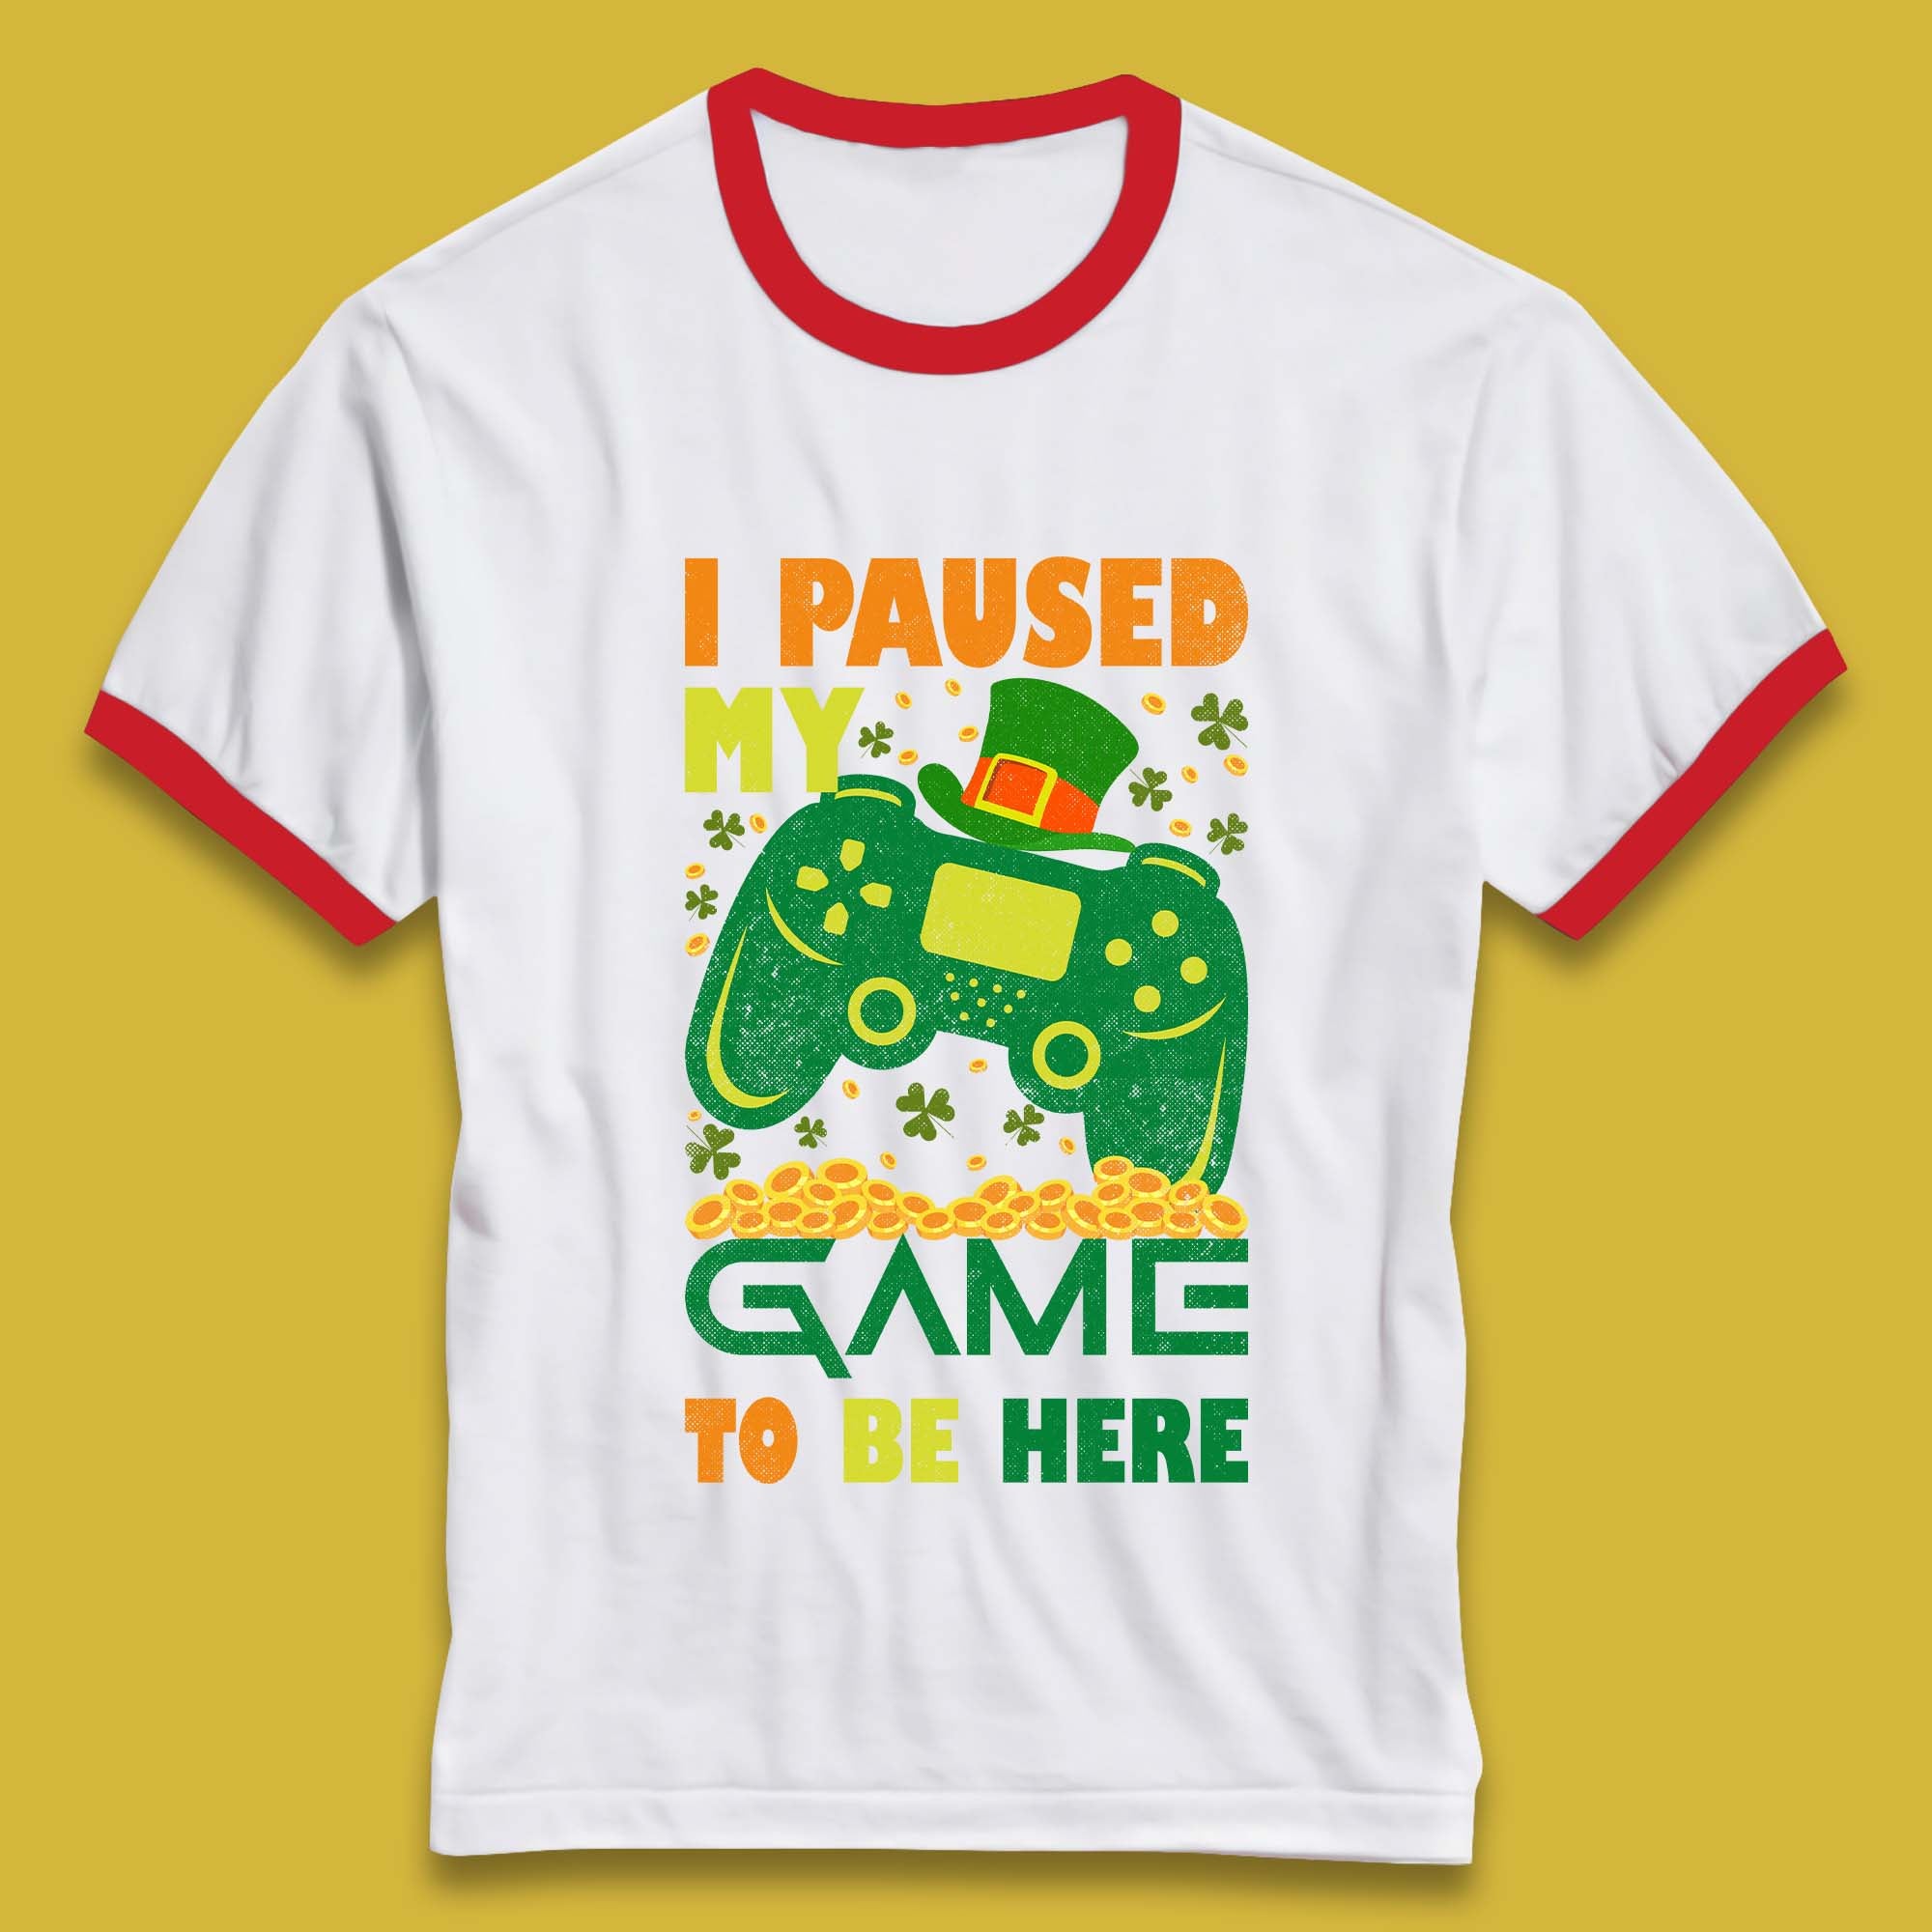 I Paused My Game To Be Here Ringer T-Shirt